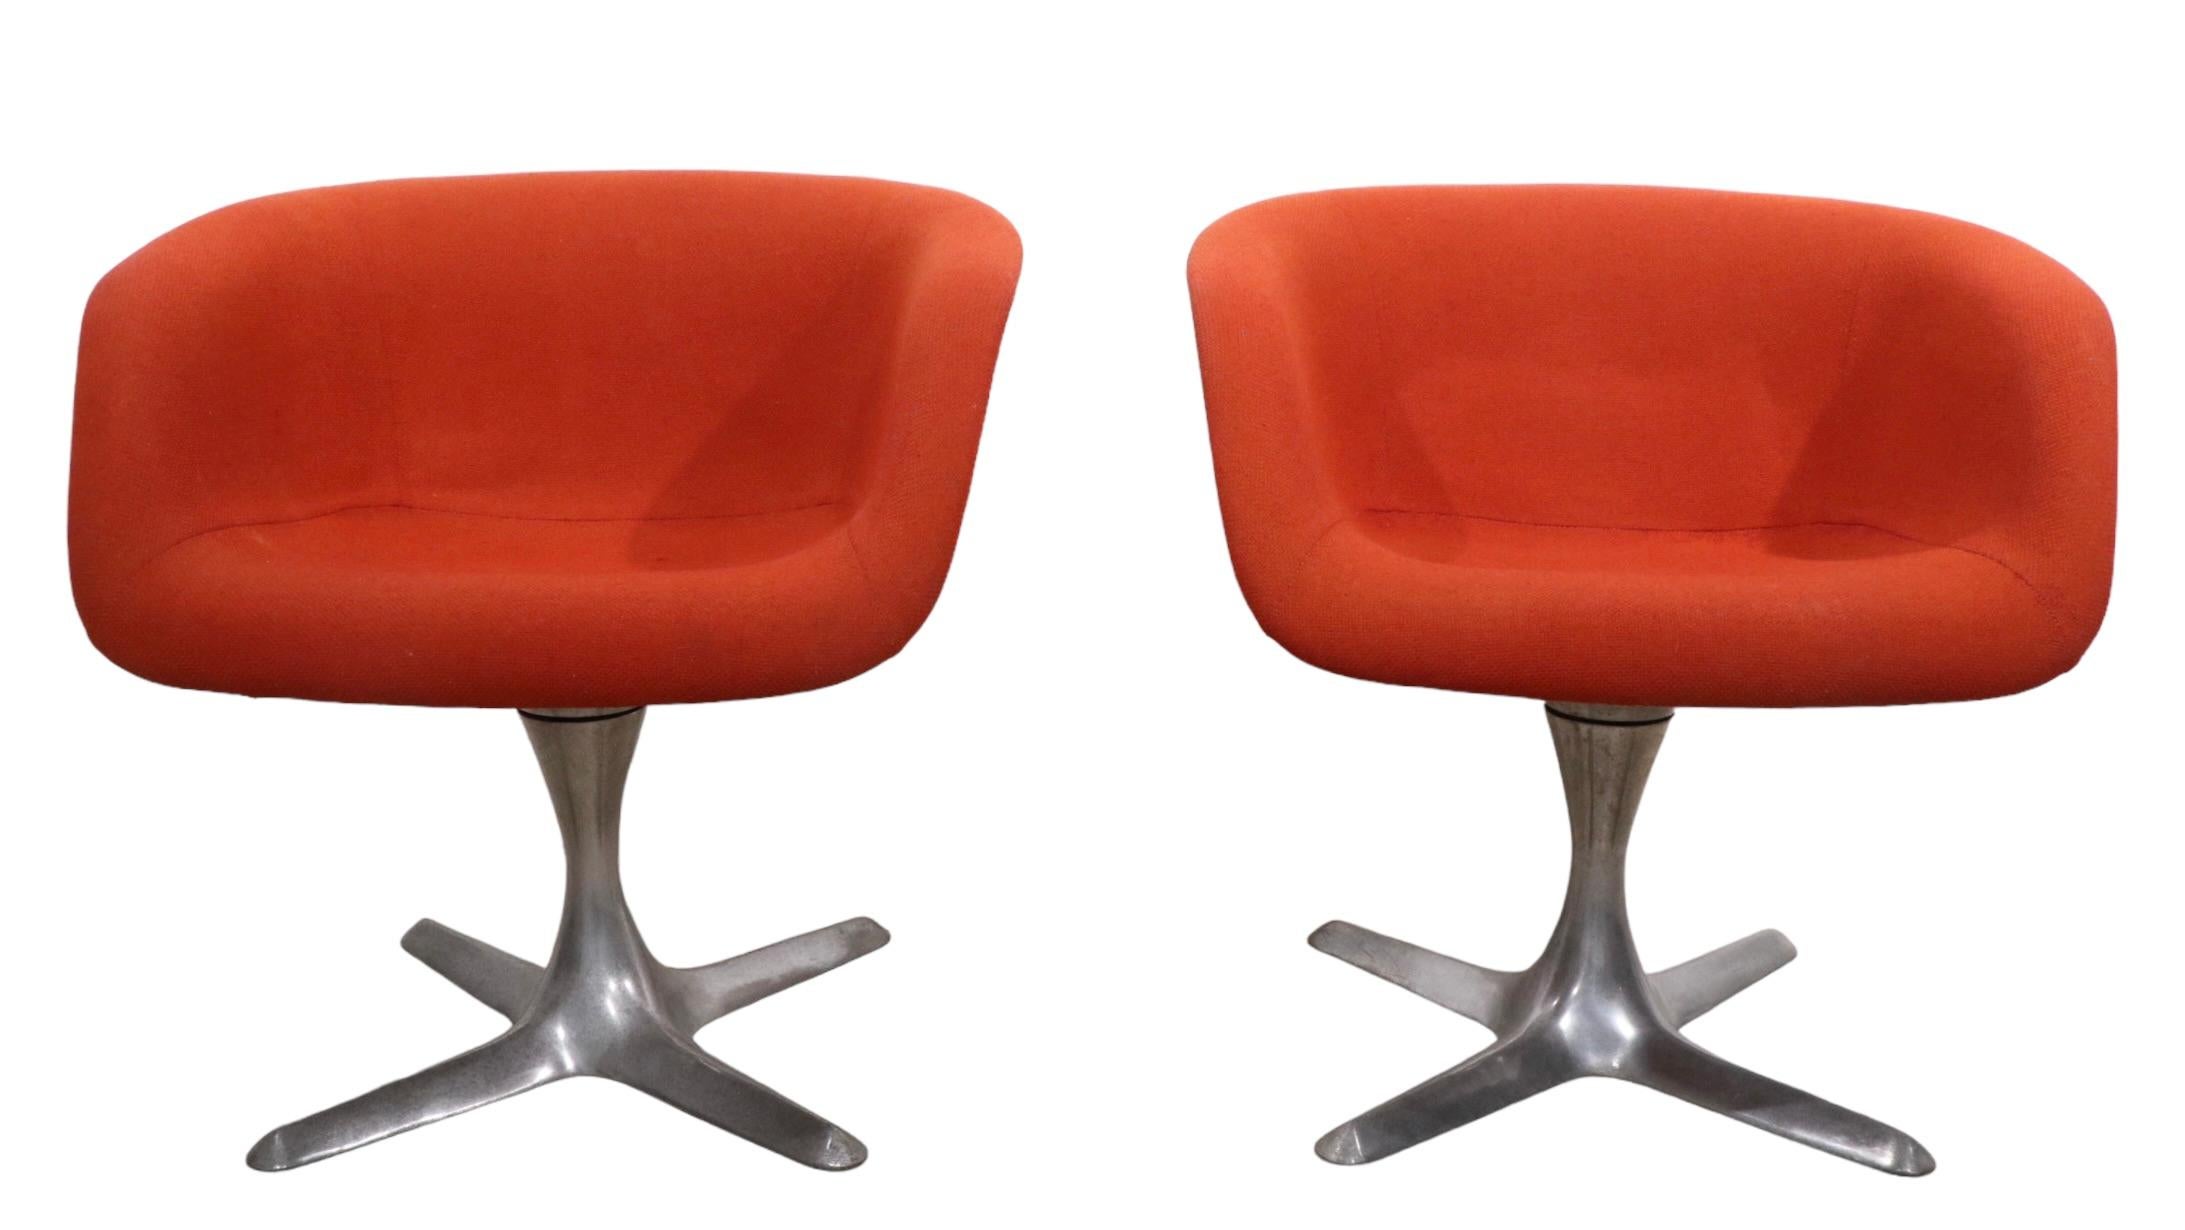 Pr. Swivel Chairs by Hugh Acton for Burke Acton, circa 1960s For Sale 2